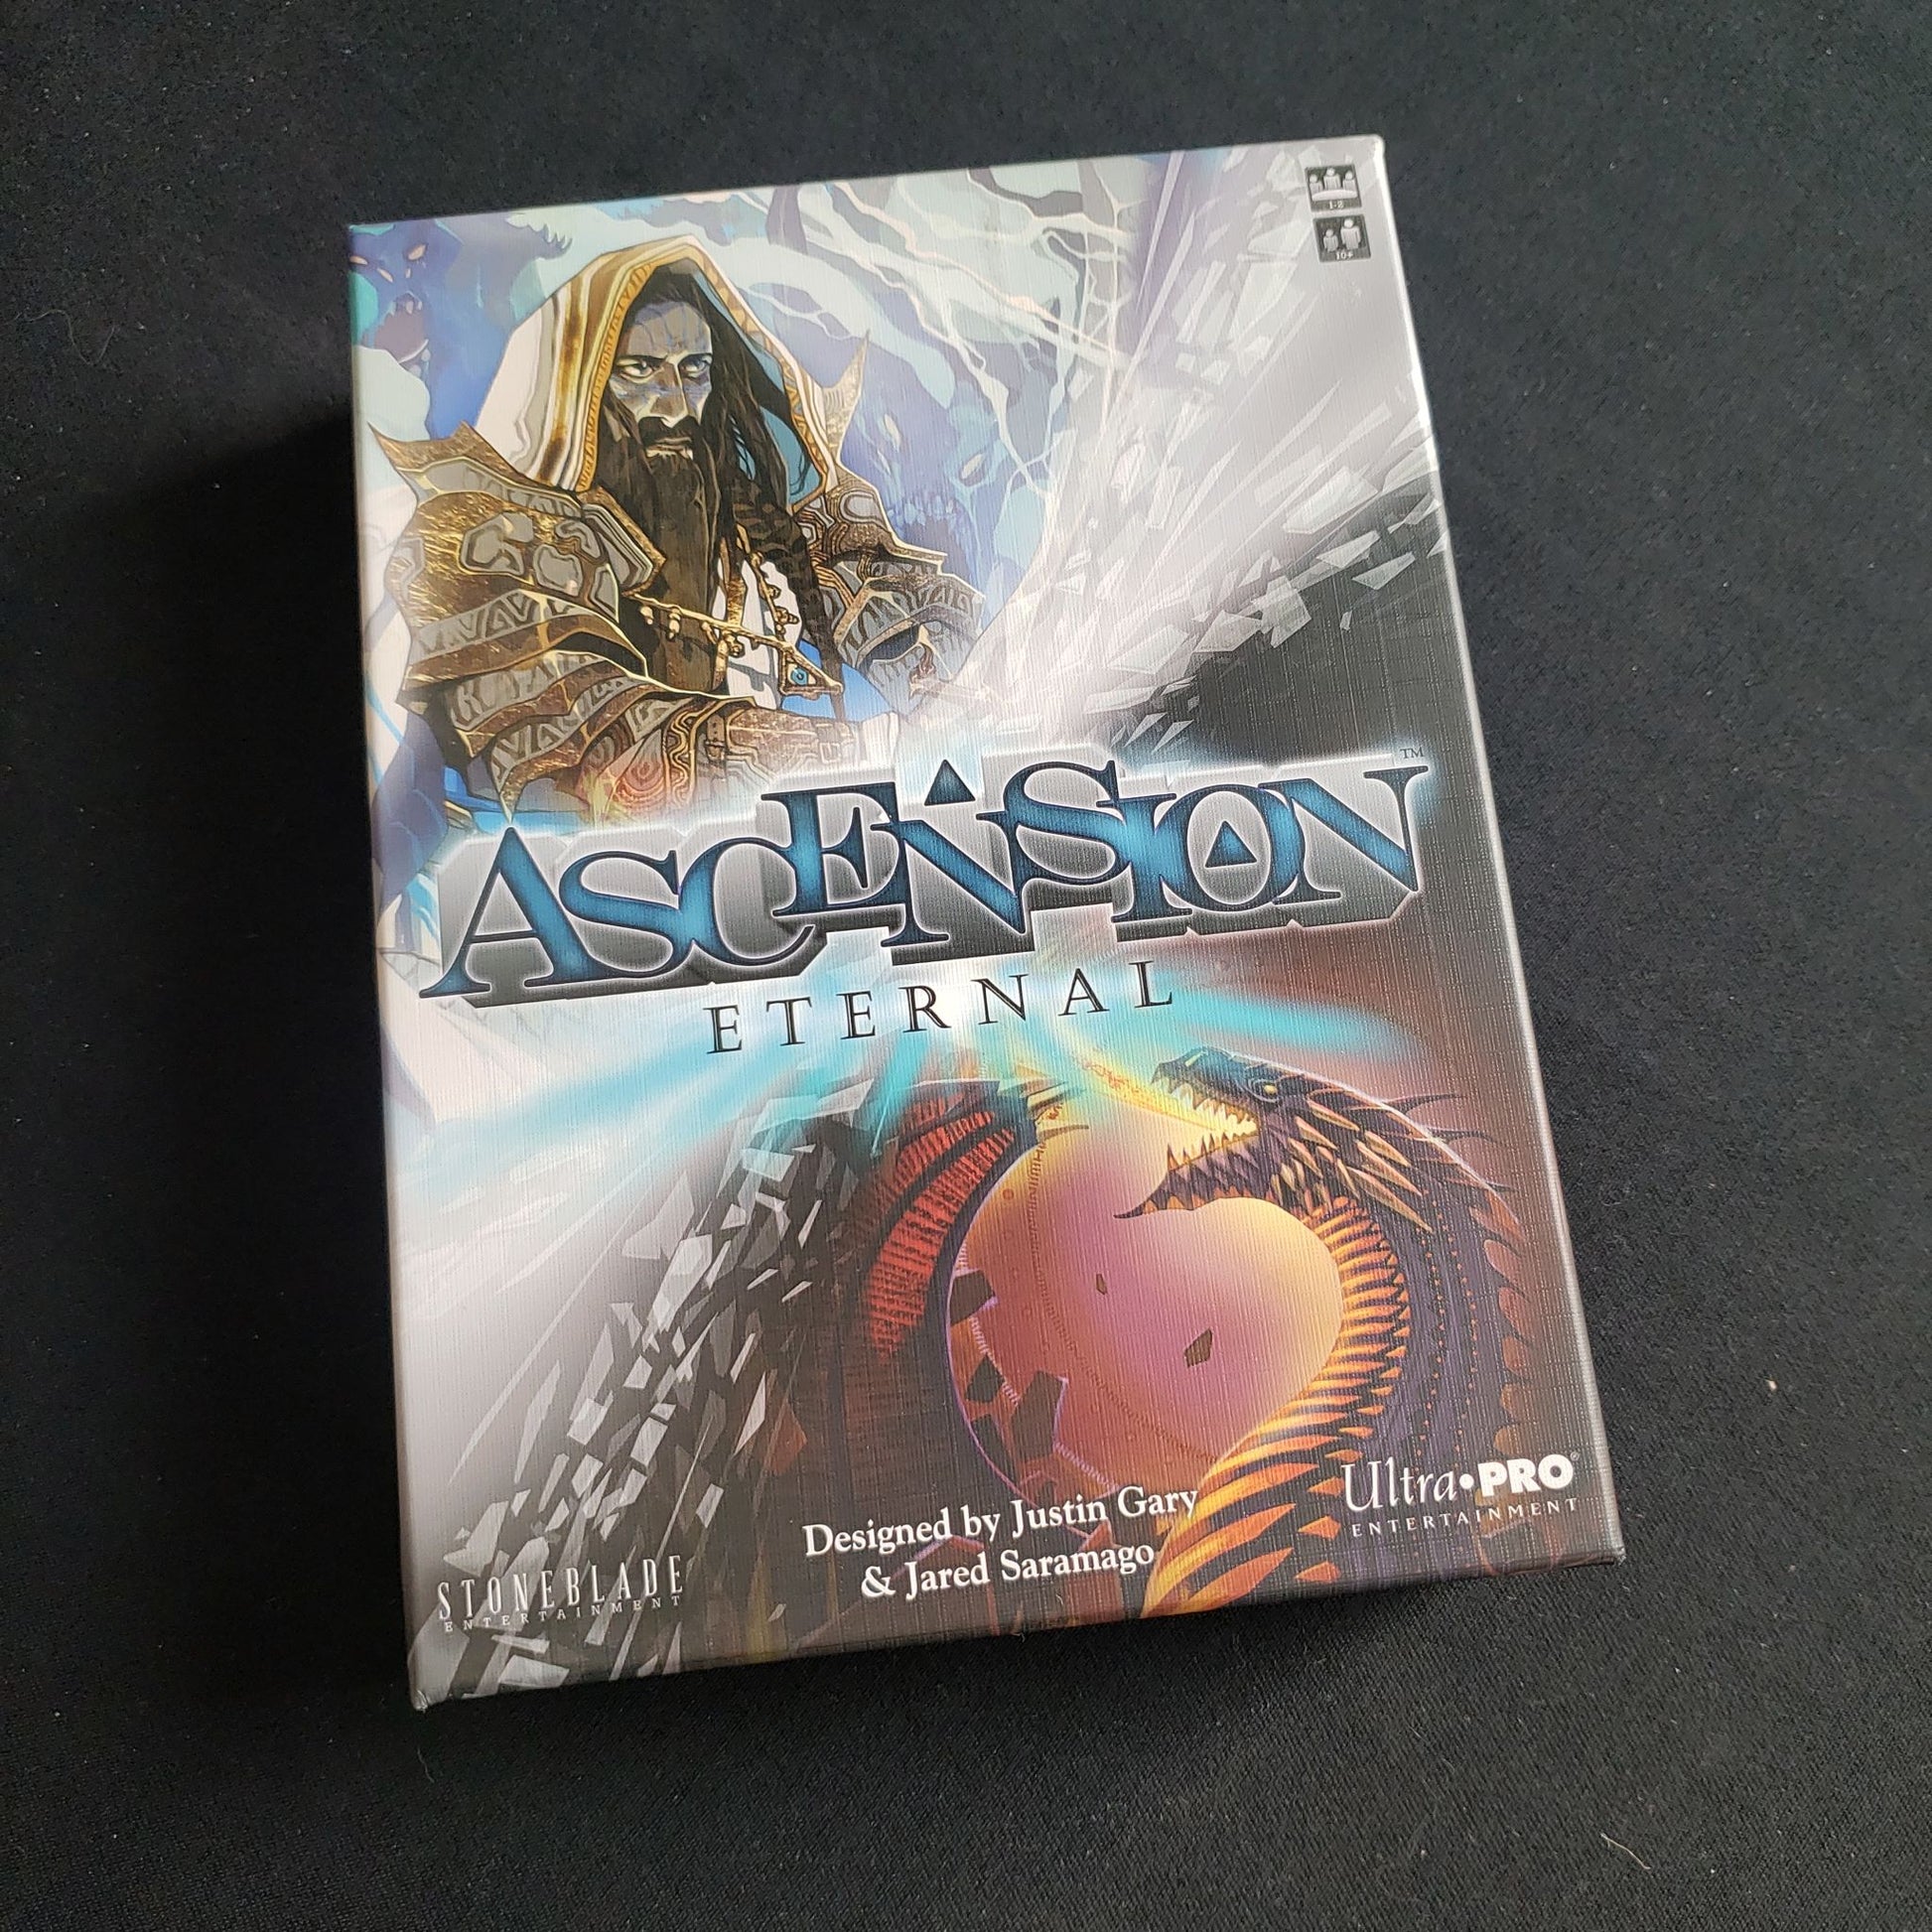 Image shows the front cover of the box of the Ascension Eternal card game